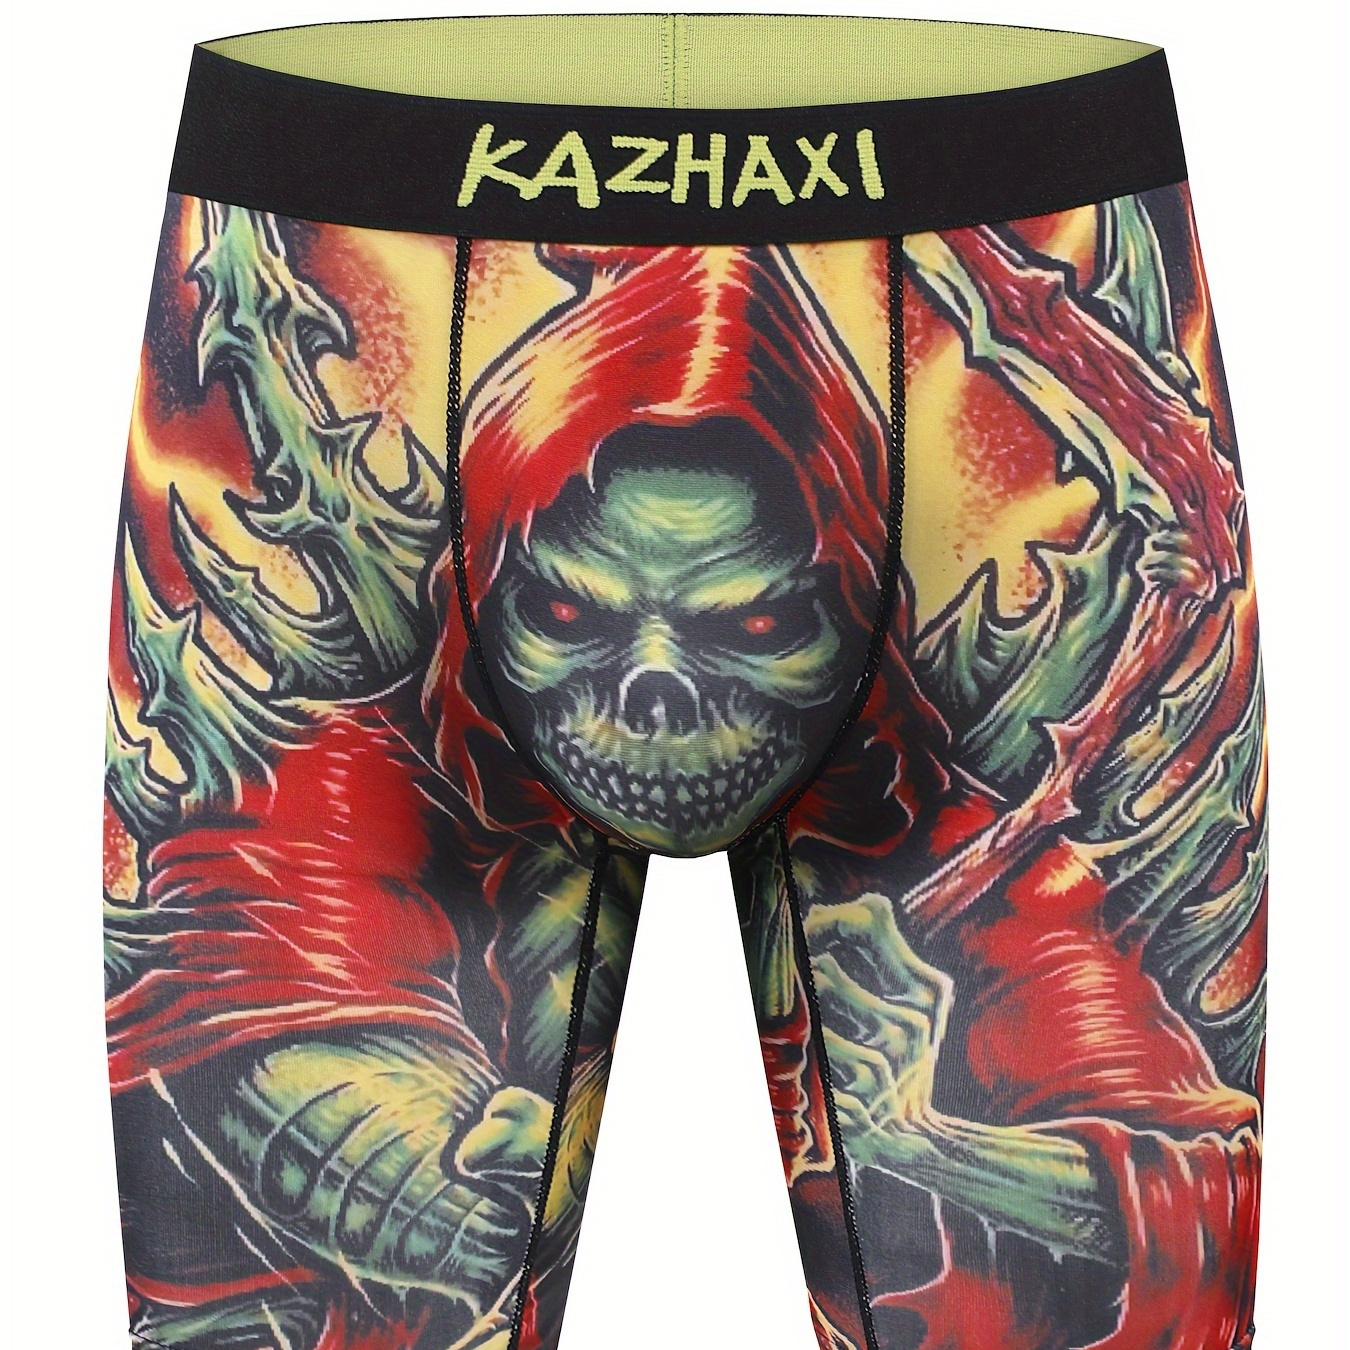 

1pc Men's Bold Skull Graphic Long Boxer Briefs Shorts, Breathable Comfy Quick Drying Stretchy Boxer Trunks, Sports Trunks, Swim Trunks For Beach Pool, Men's Novelty Underwear